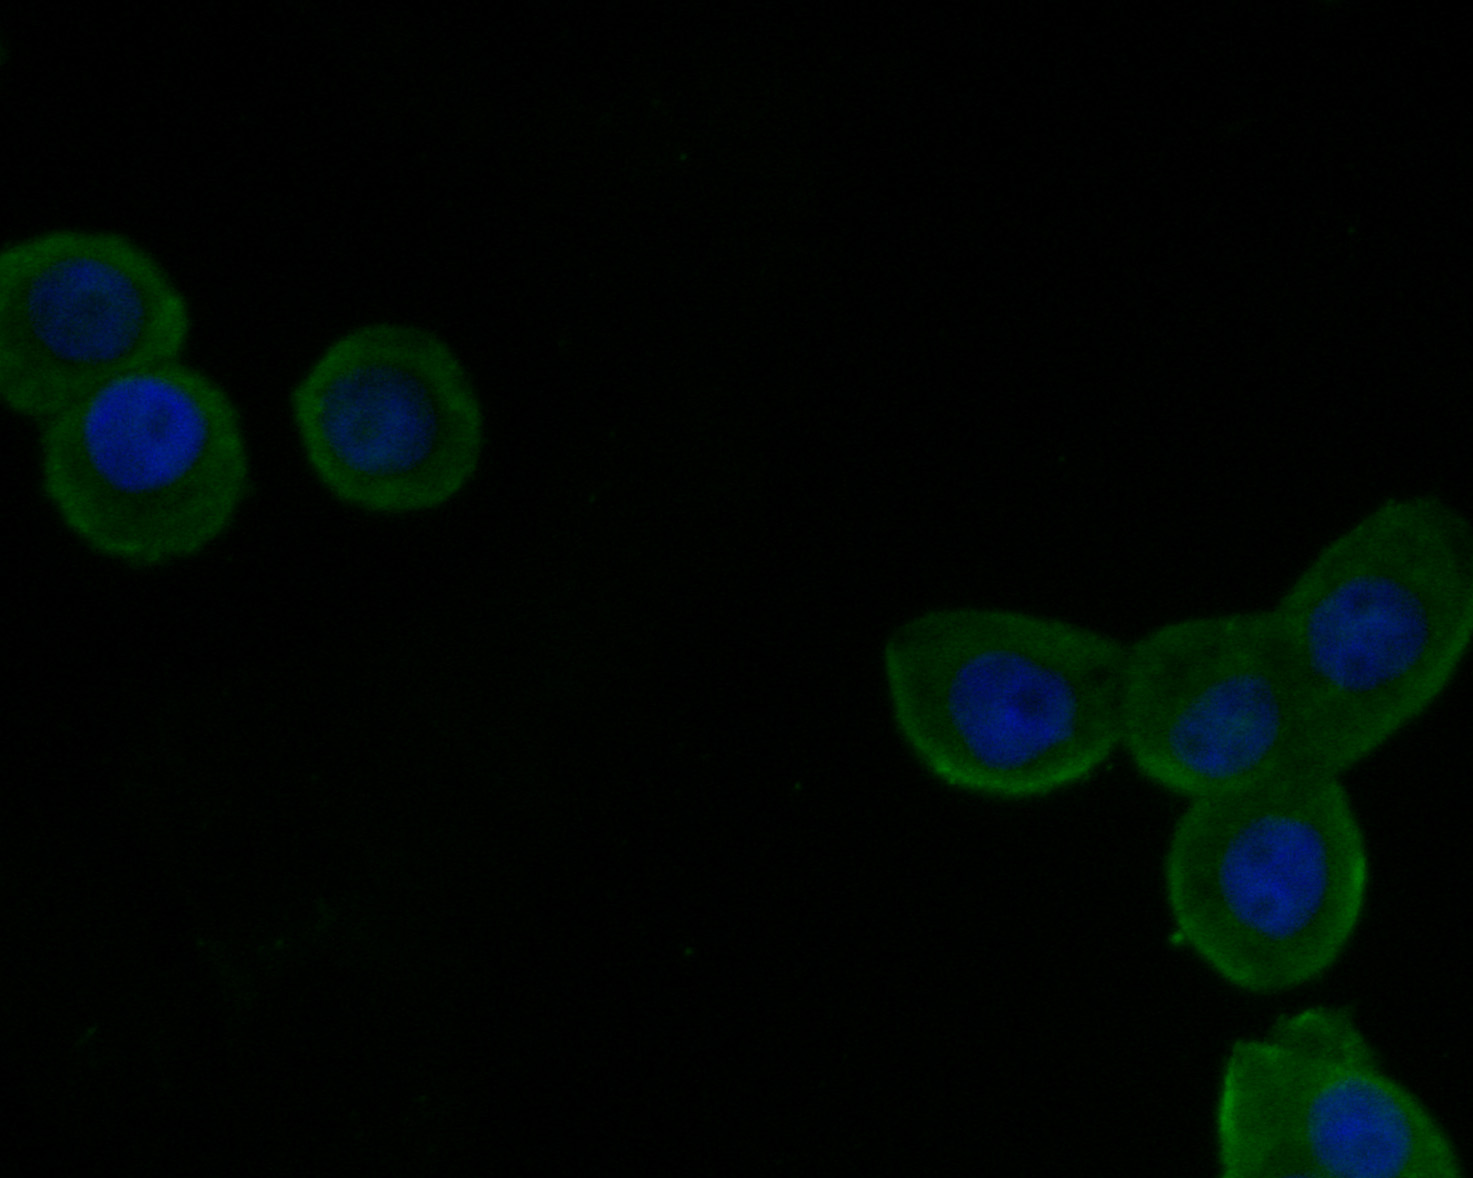 Fig2:; ICC staining of VLDL Receptor in LOVO cells (green). Formalin fixed cells were permeabilized with 0.1% Triton X-100 in TBS for 10 minutes at room temperature and blocked with 1% Blocker BSA for 15 minutes at room temperature. Cells were probed with the primary antibody ( 1/100) for 1 hour at room temperature, washed with PBS. Alexa Fluor®488 Goat anti-Rabbit IgG was used as the secondary antibody at 1/1,000 dilution. The nuclear counter stain is DAPI (blue).